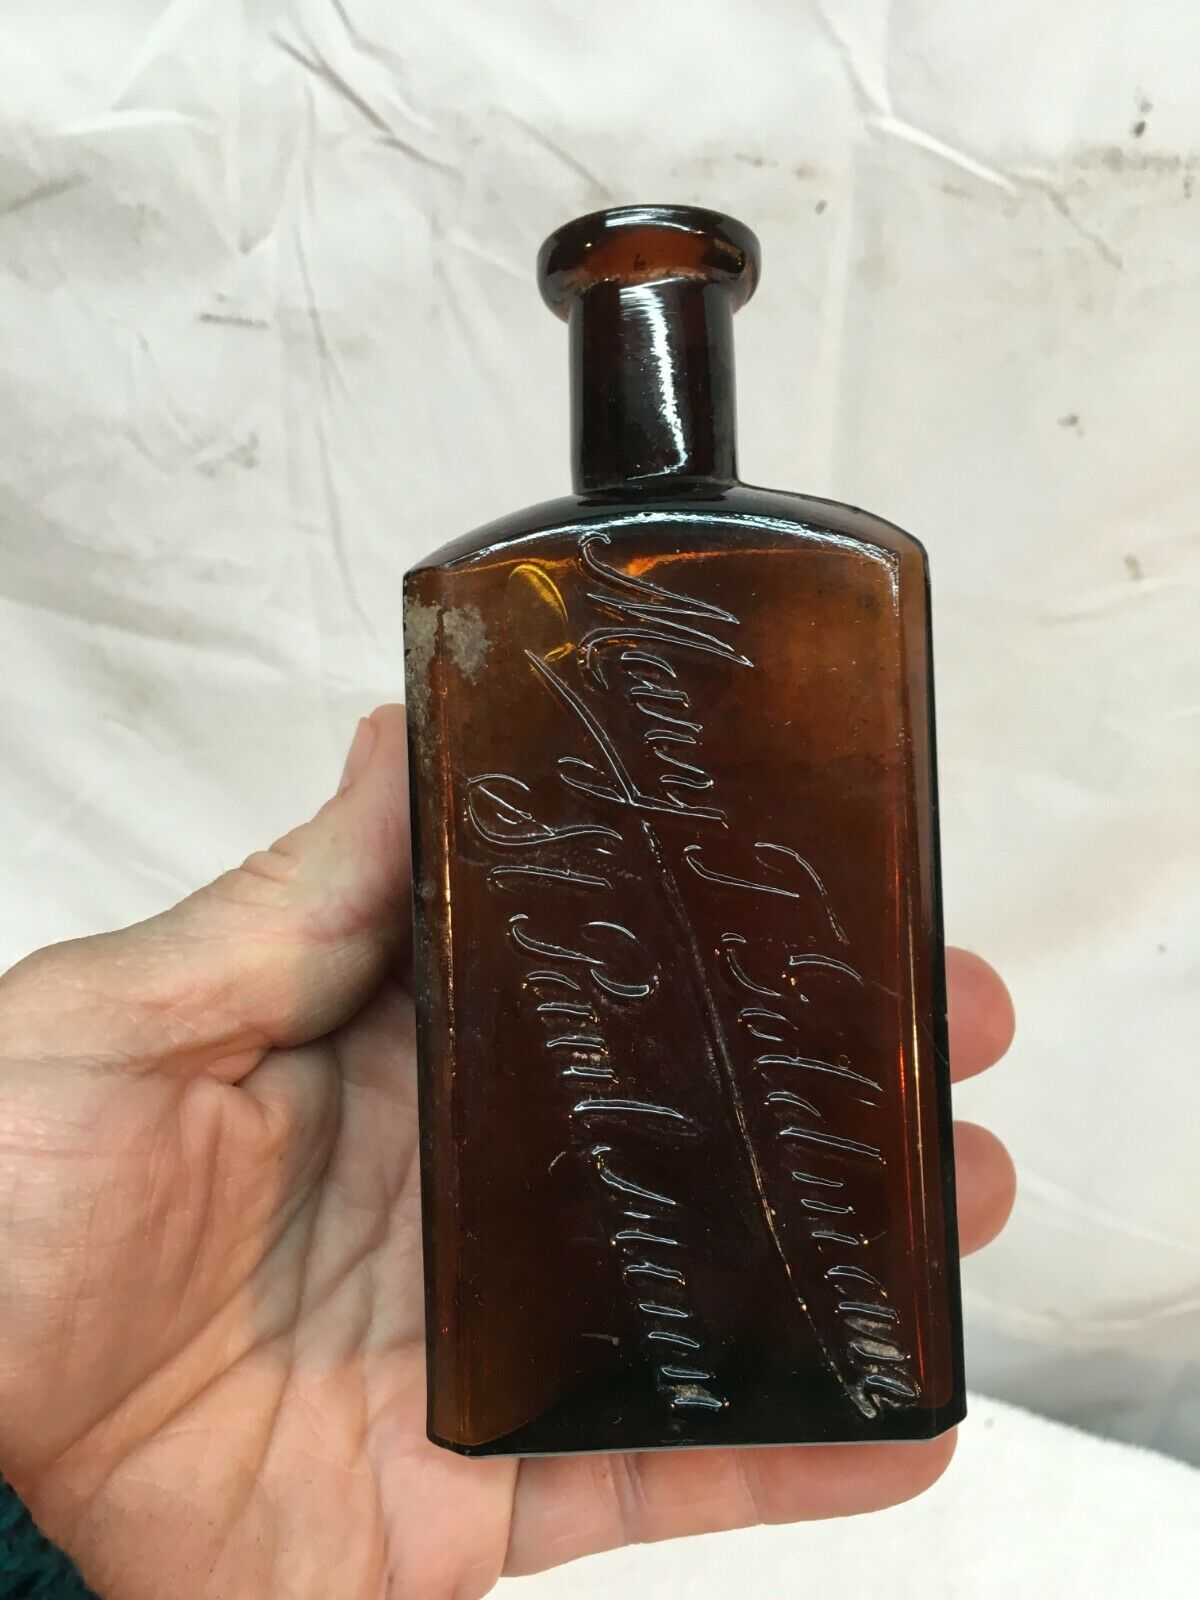 Vintage Brown Glass Apothecary Bottle Embossed May T Goldman St Paul Minn.